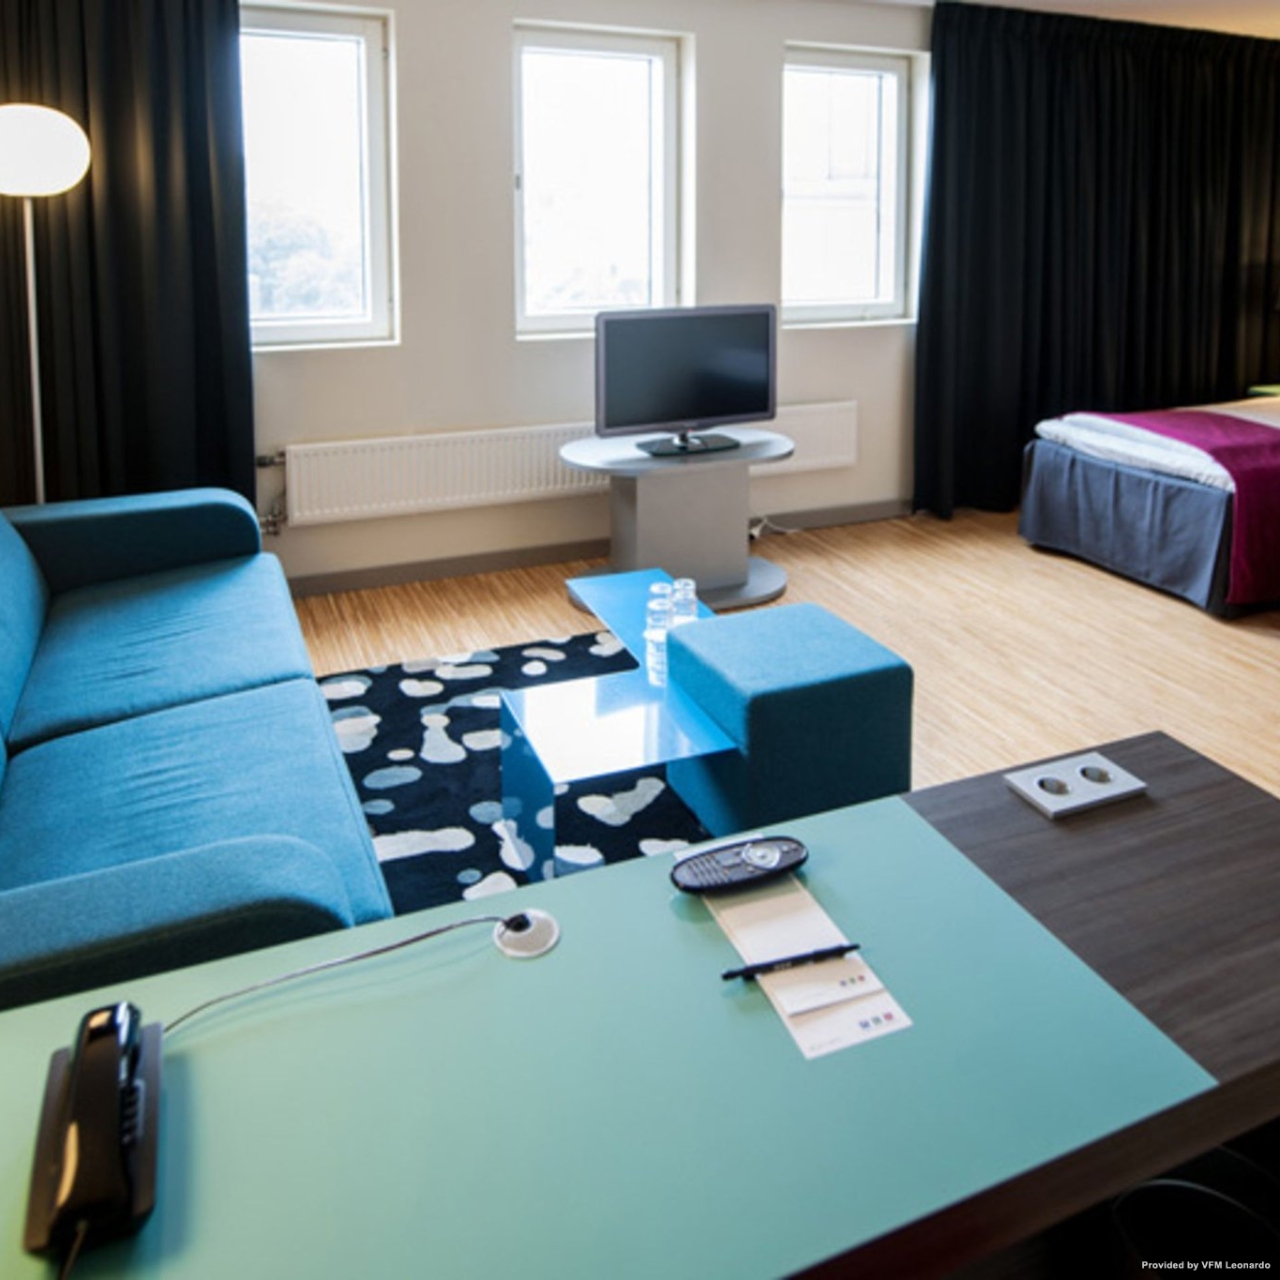 Comfort Hotel Helsingborg at HRS with